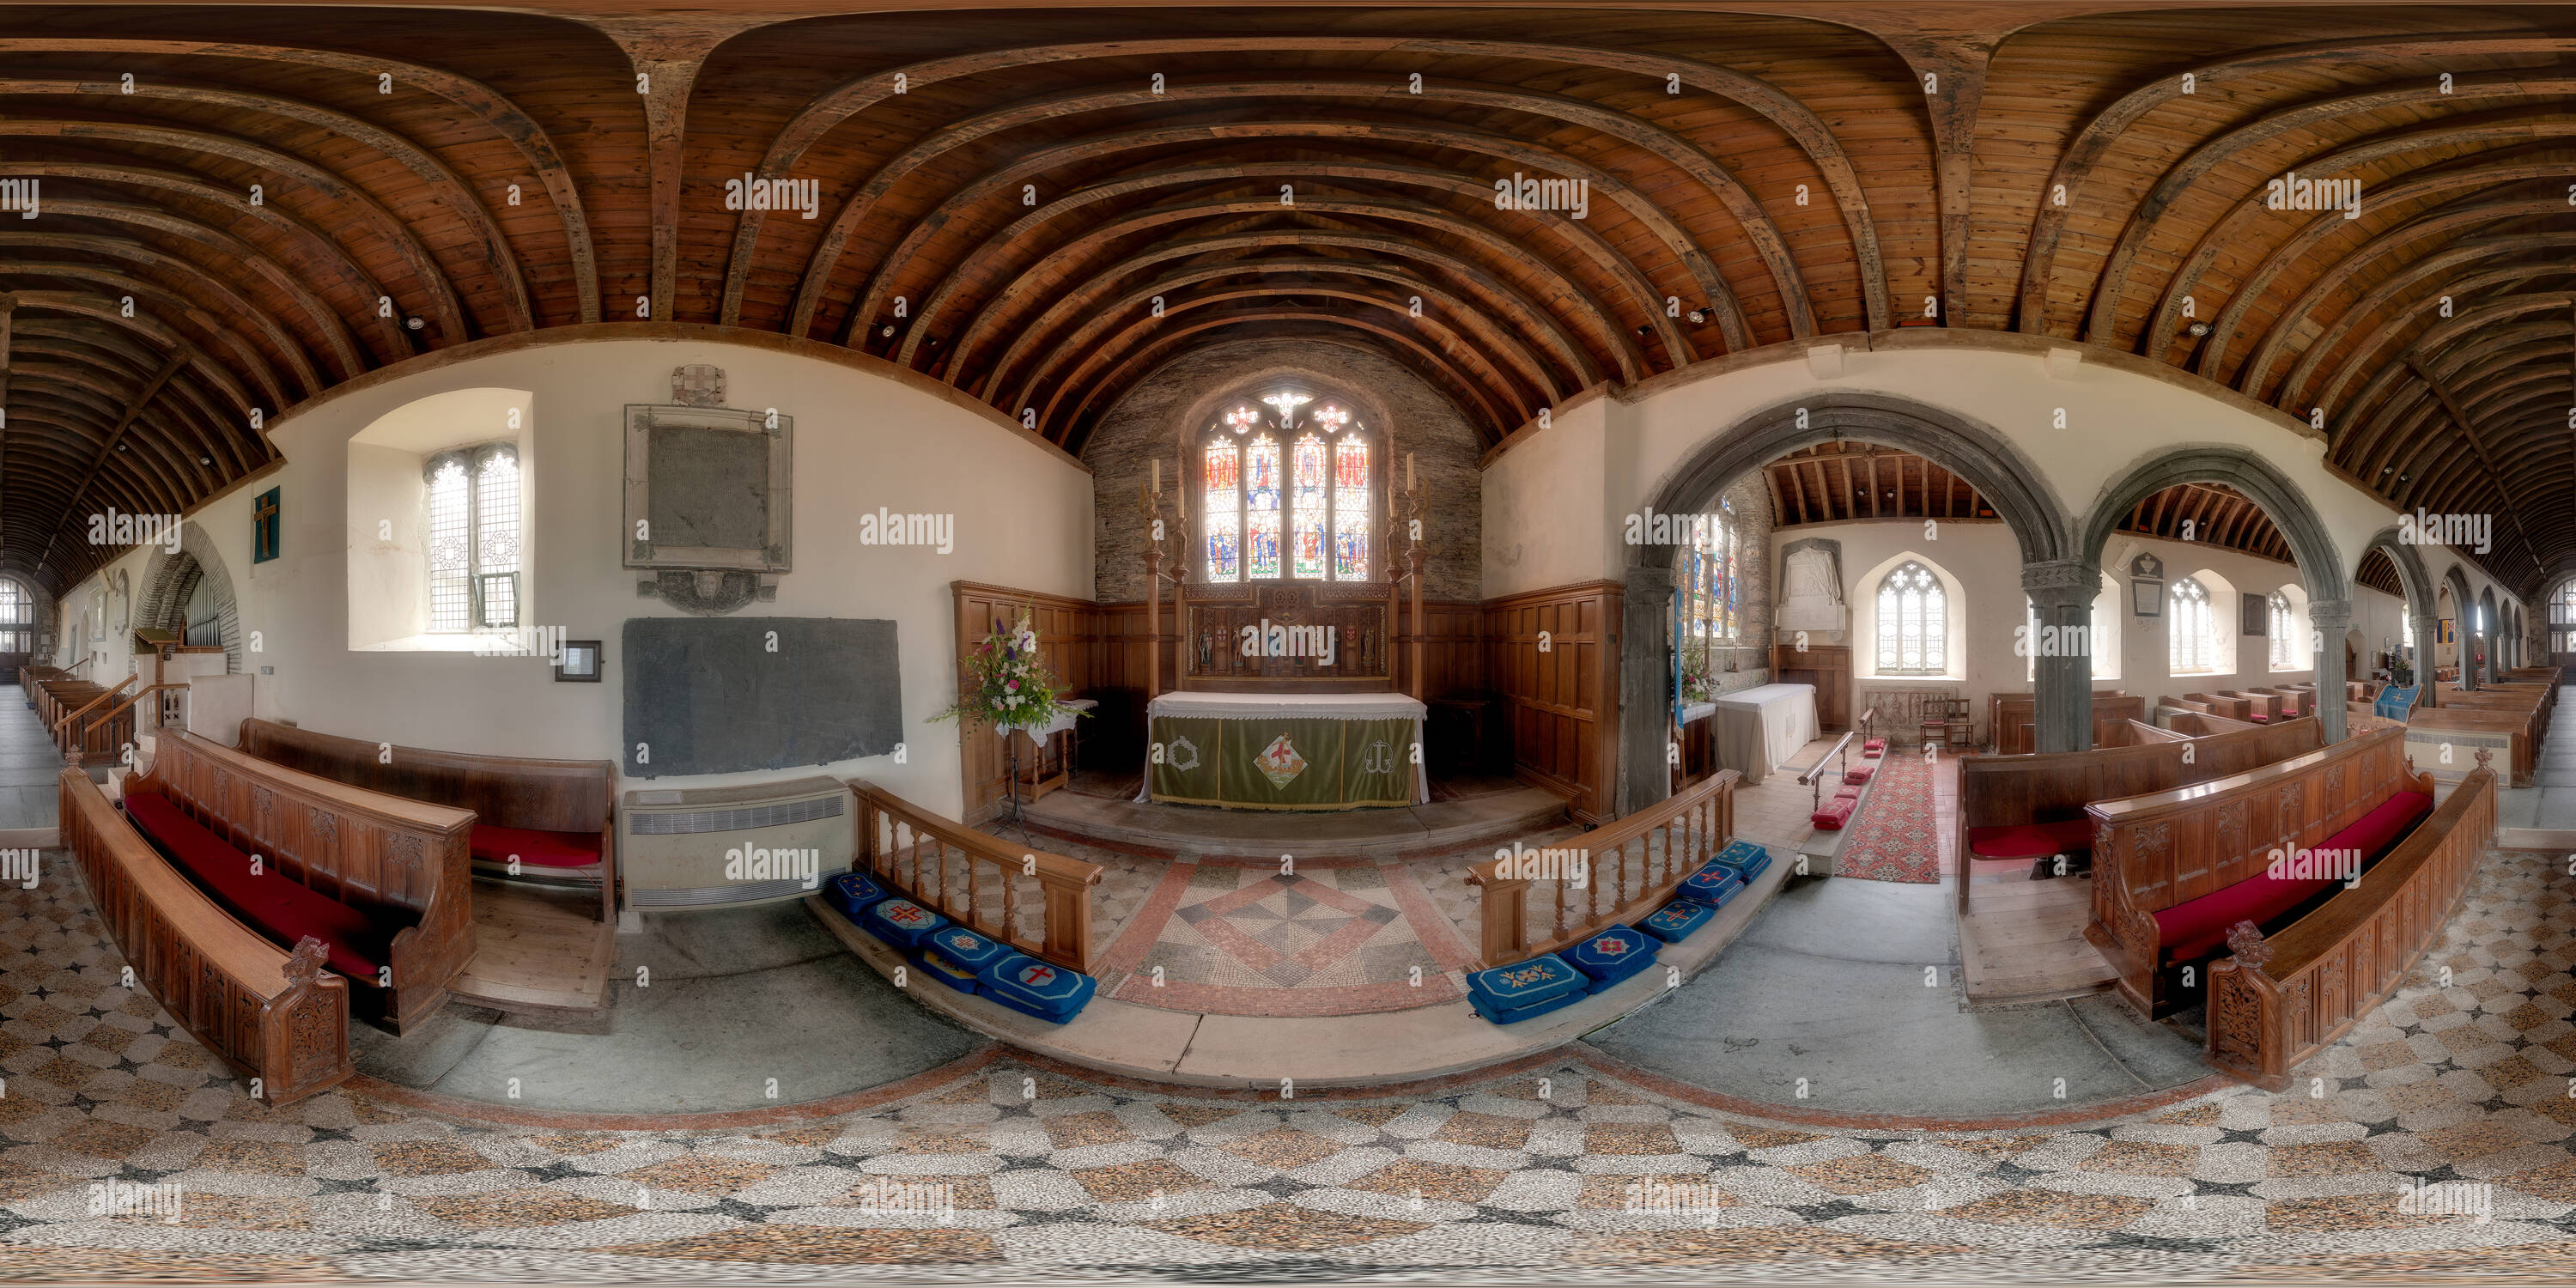 360 degree panoramic view of St Merryn Church, the Chancel and Nave